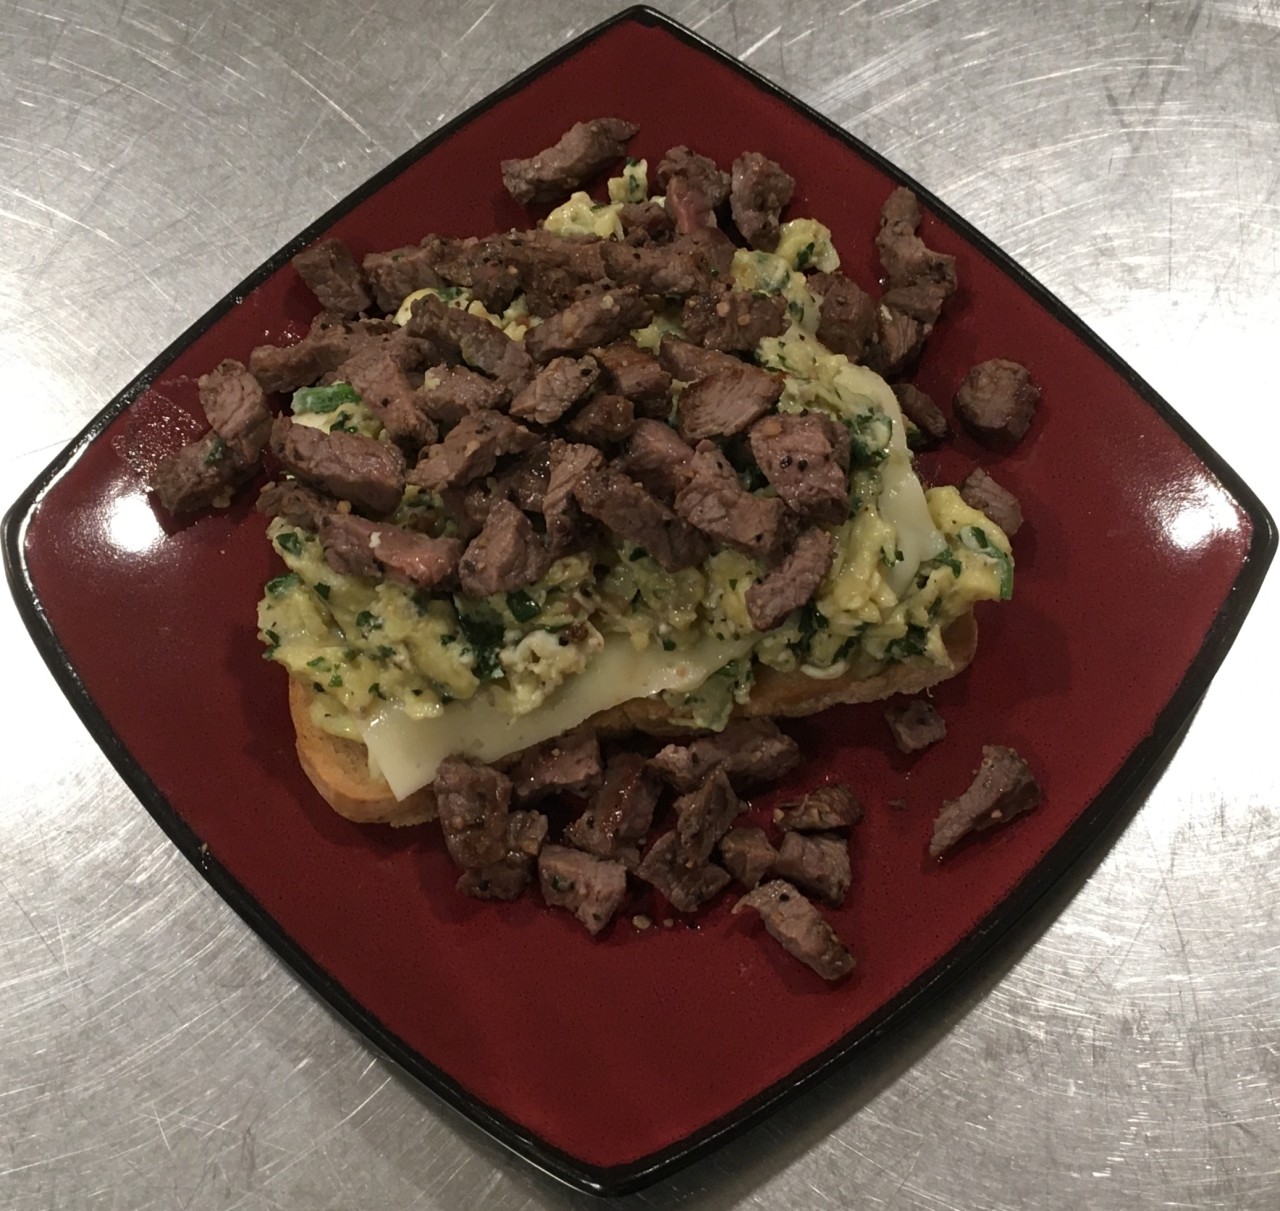 <a class="bx-tag" rel="tag" href="https://streetloc.com/view-channel-profile/whatsforbreakfast"><s>#</s><b>whatsforbreakfast</b></a> Carb0naut Bread Open Faced Spinach Egg Scramble (in Butter), Havarti Cheese, topped with Sliced and Diced Steak (leftovers from dinner :-)